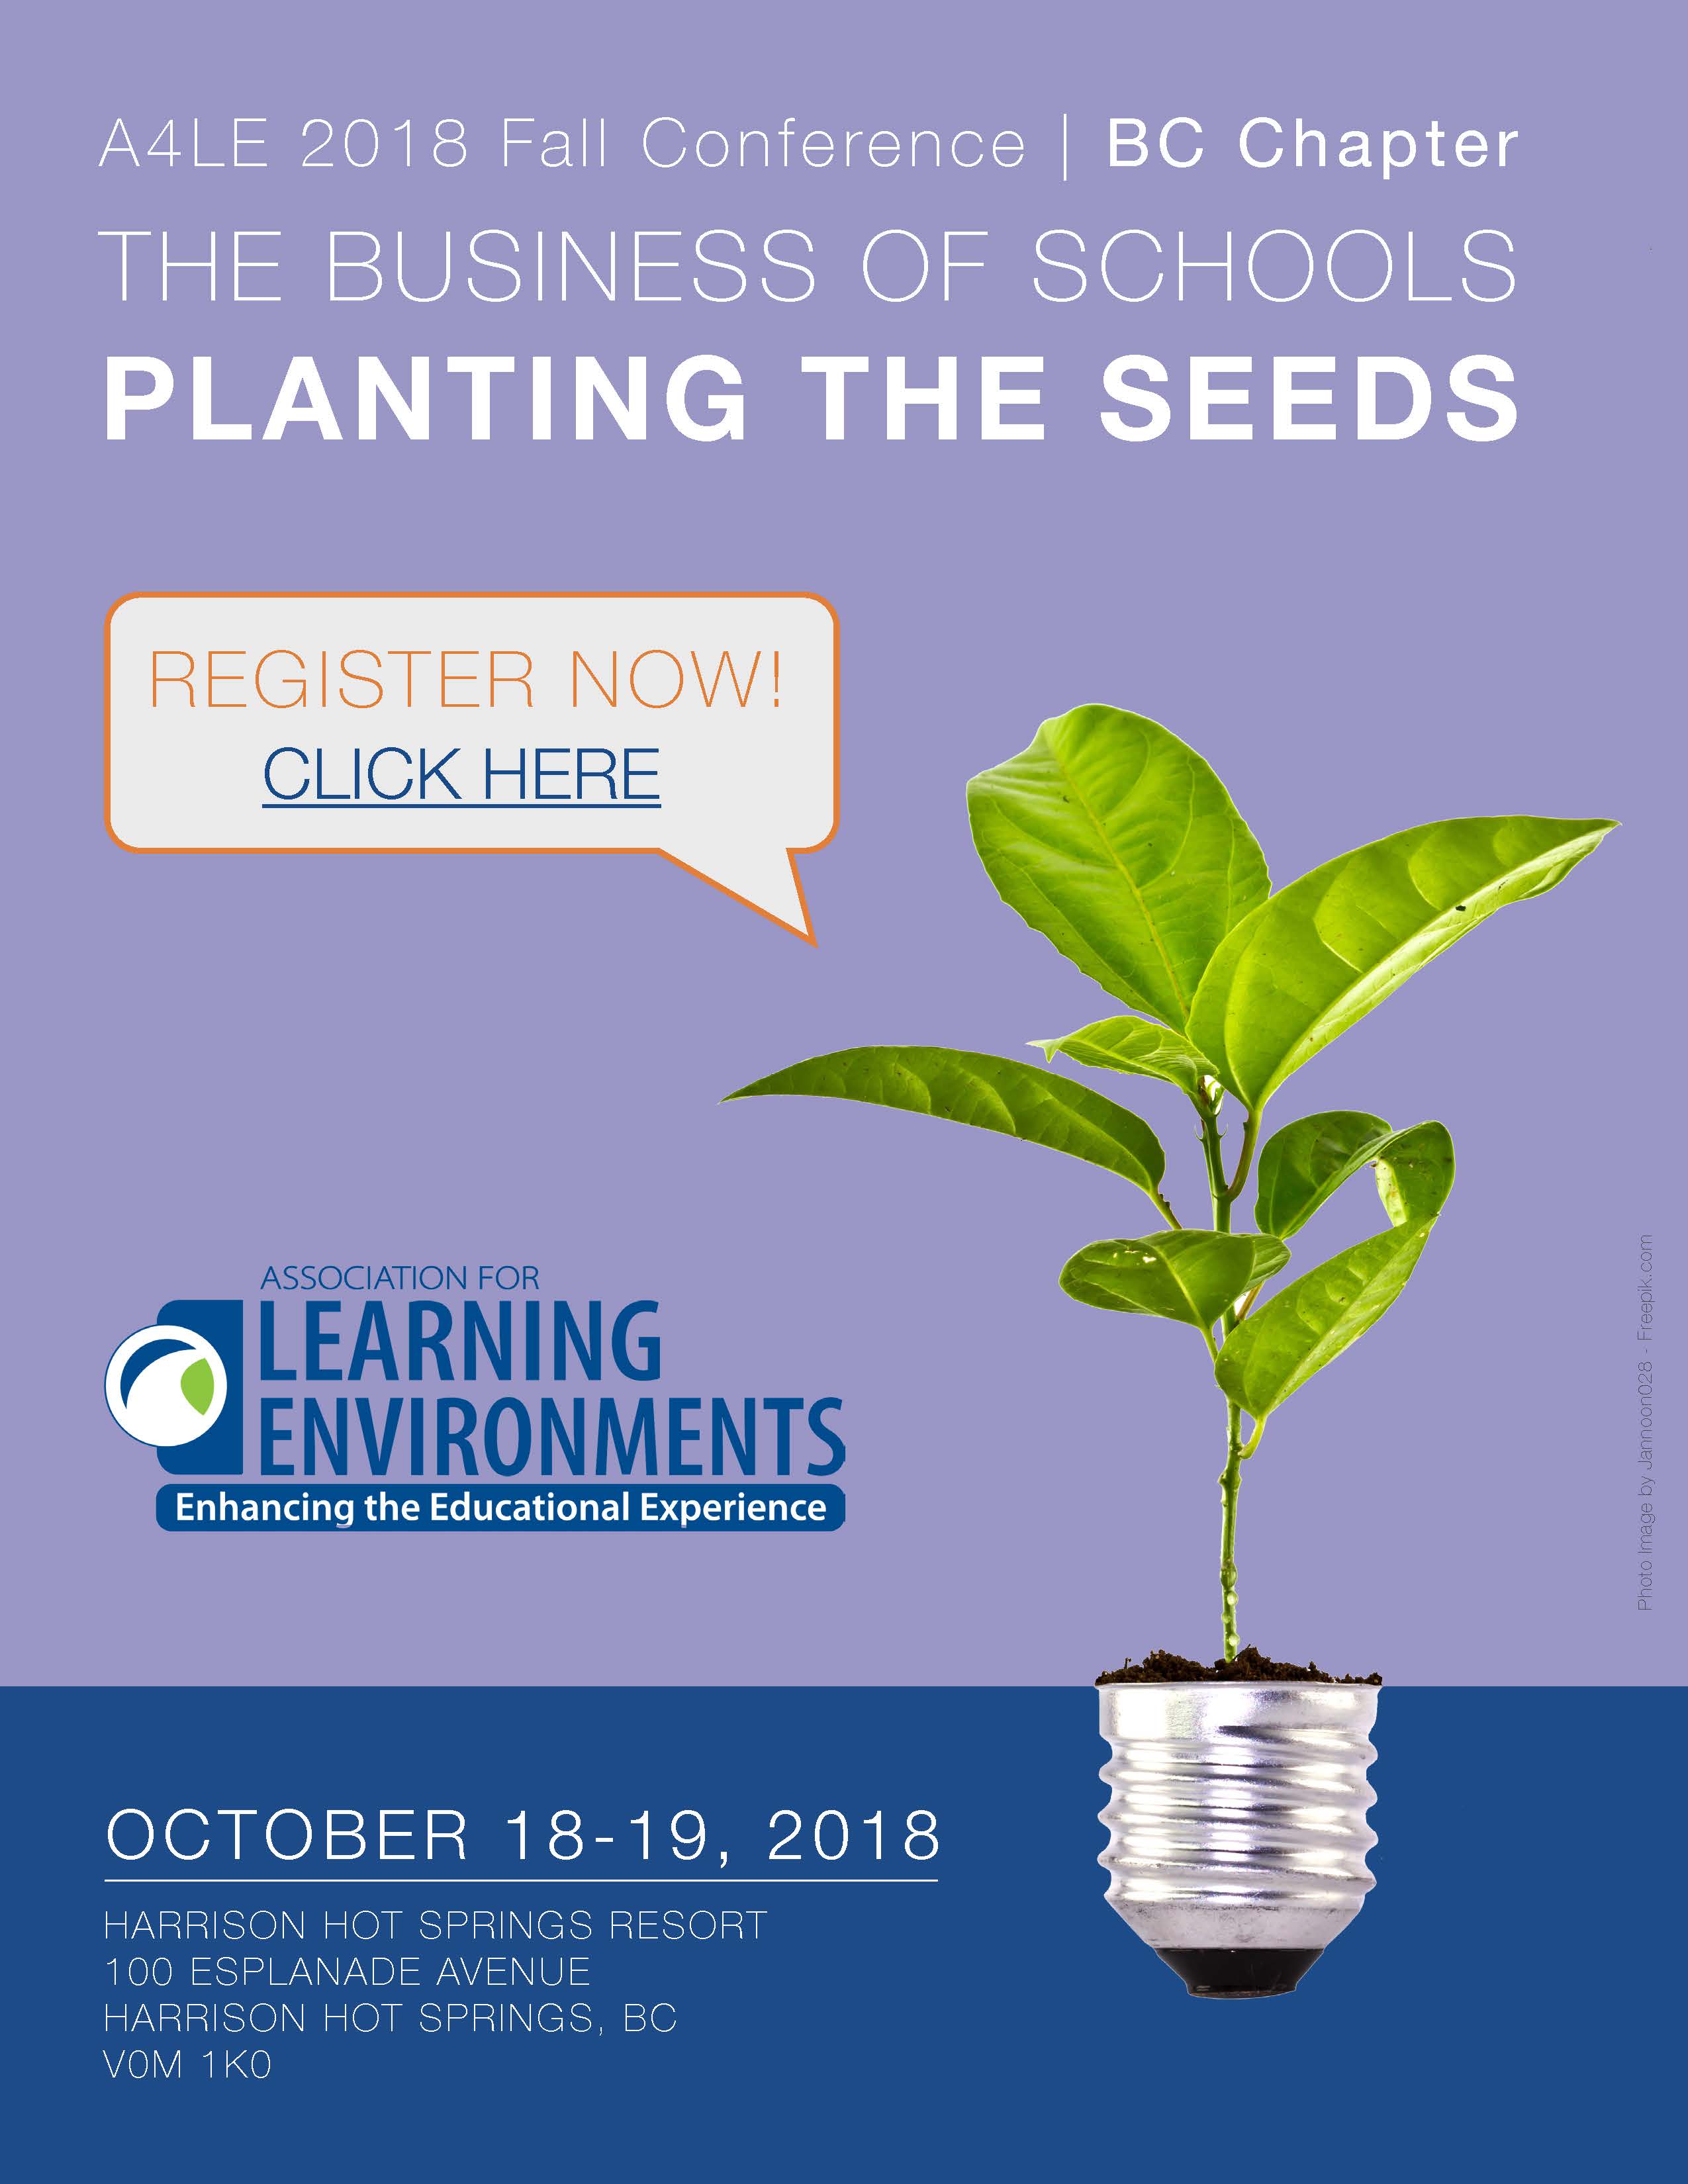 The Business of Schools: Planting the Seeds